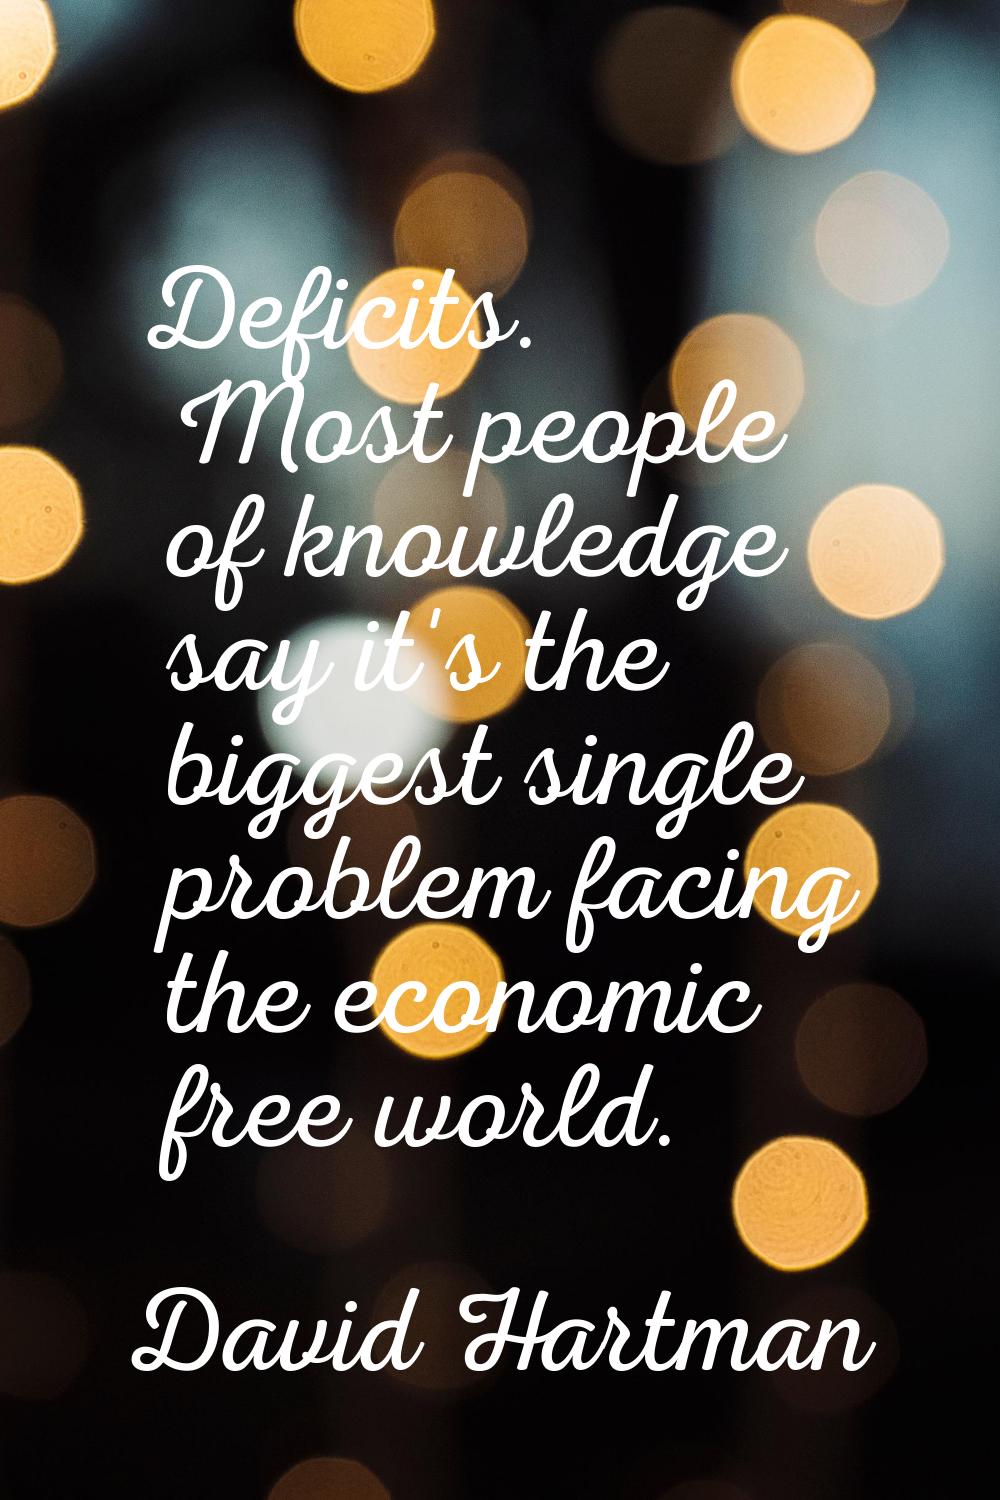 Deficits. Most people of knowledge say it's the biggest single problem facing the economic free wor